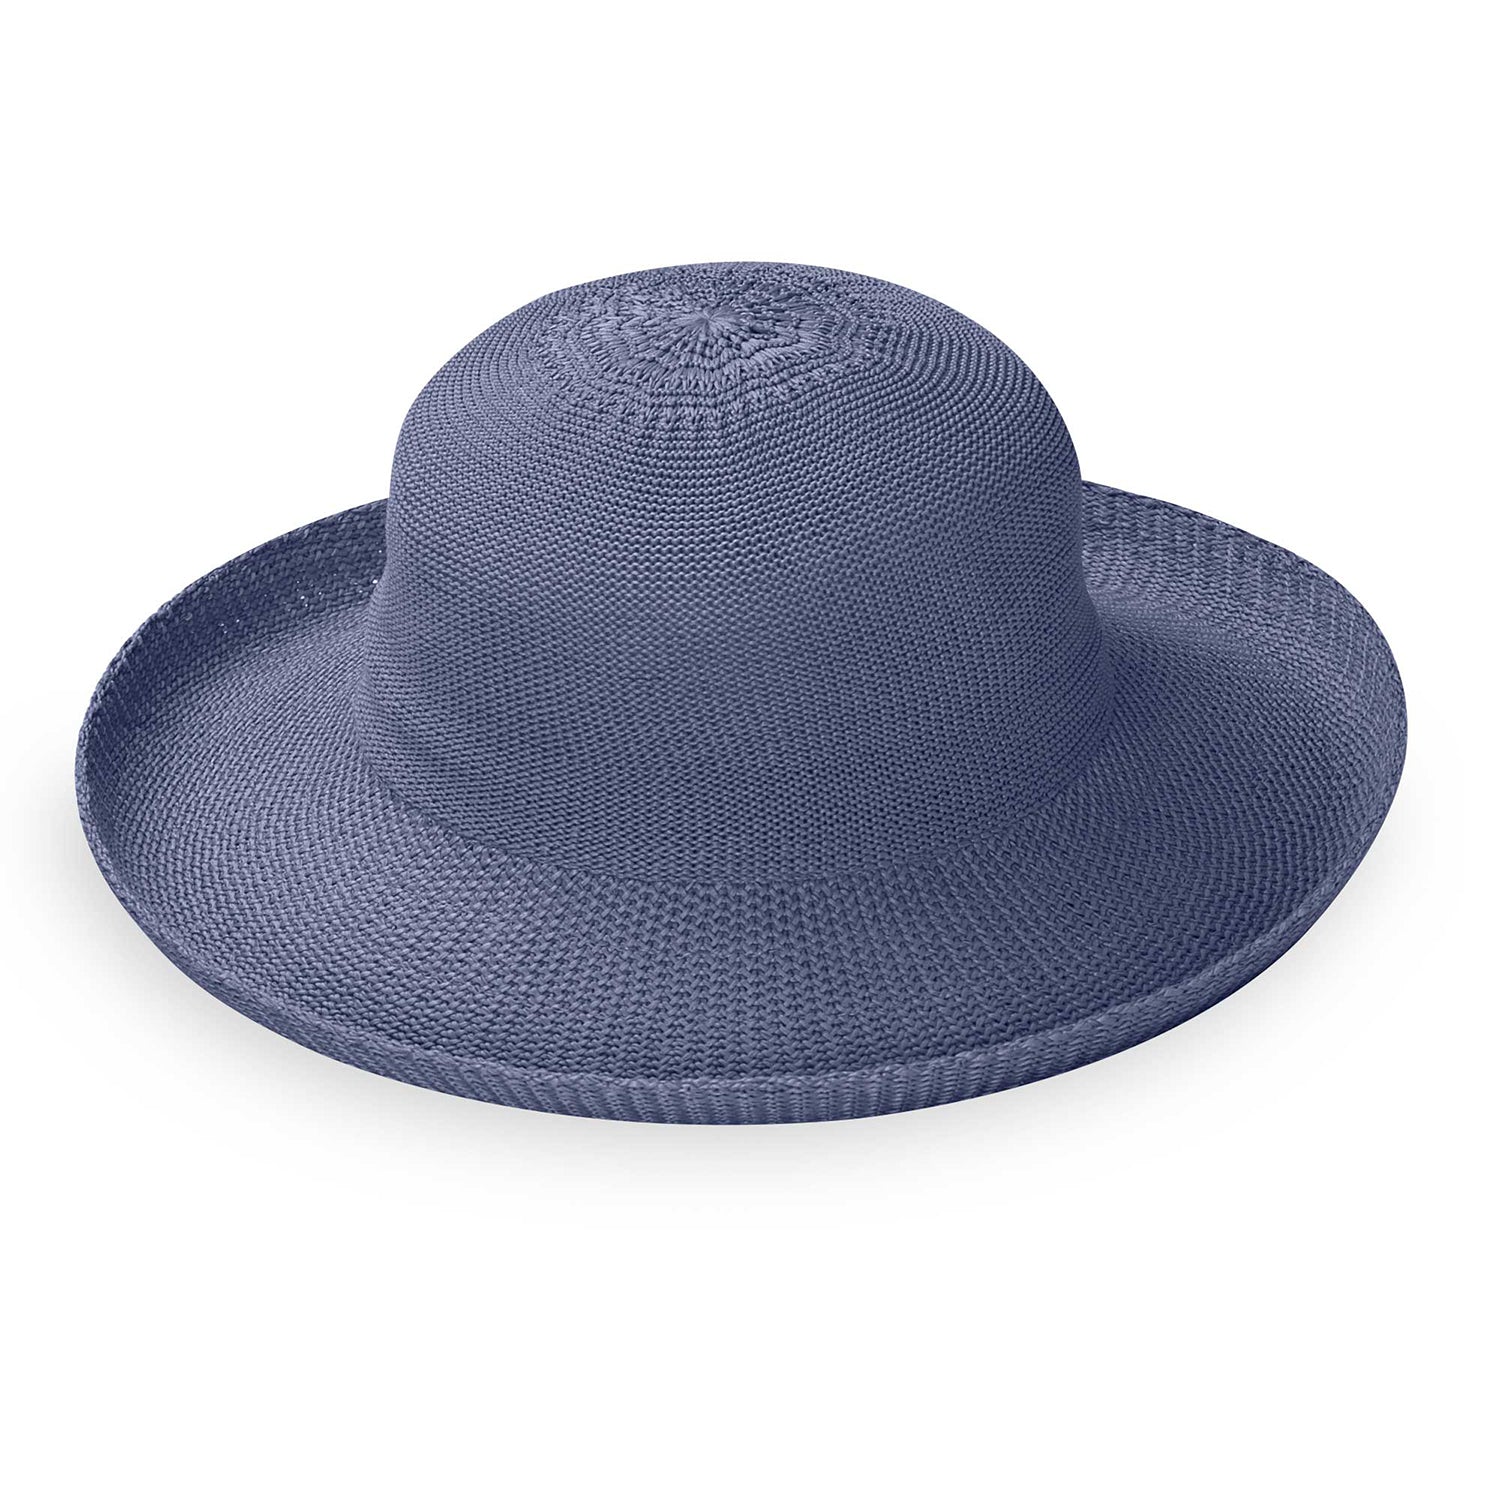 Featuring women's victoria poly straw sun hat by wallaroo with upturned brim